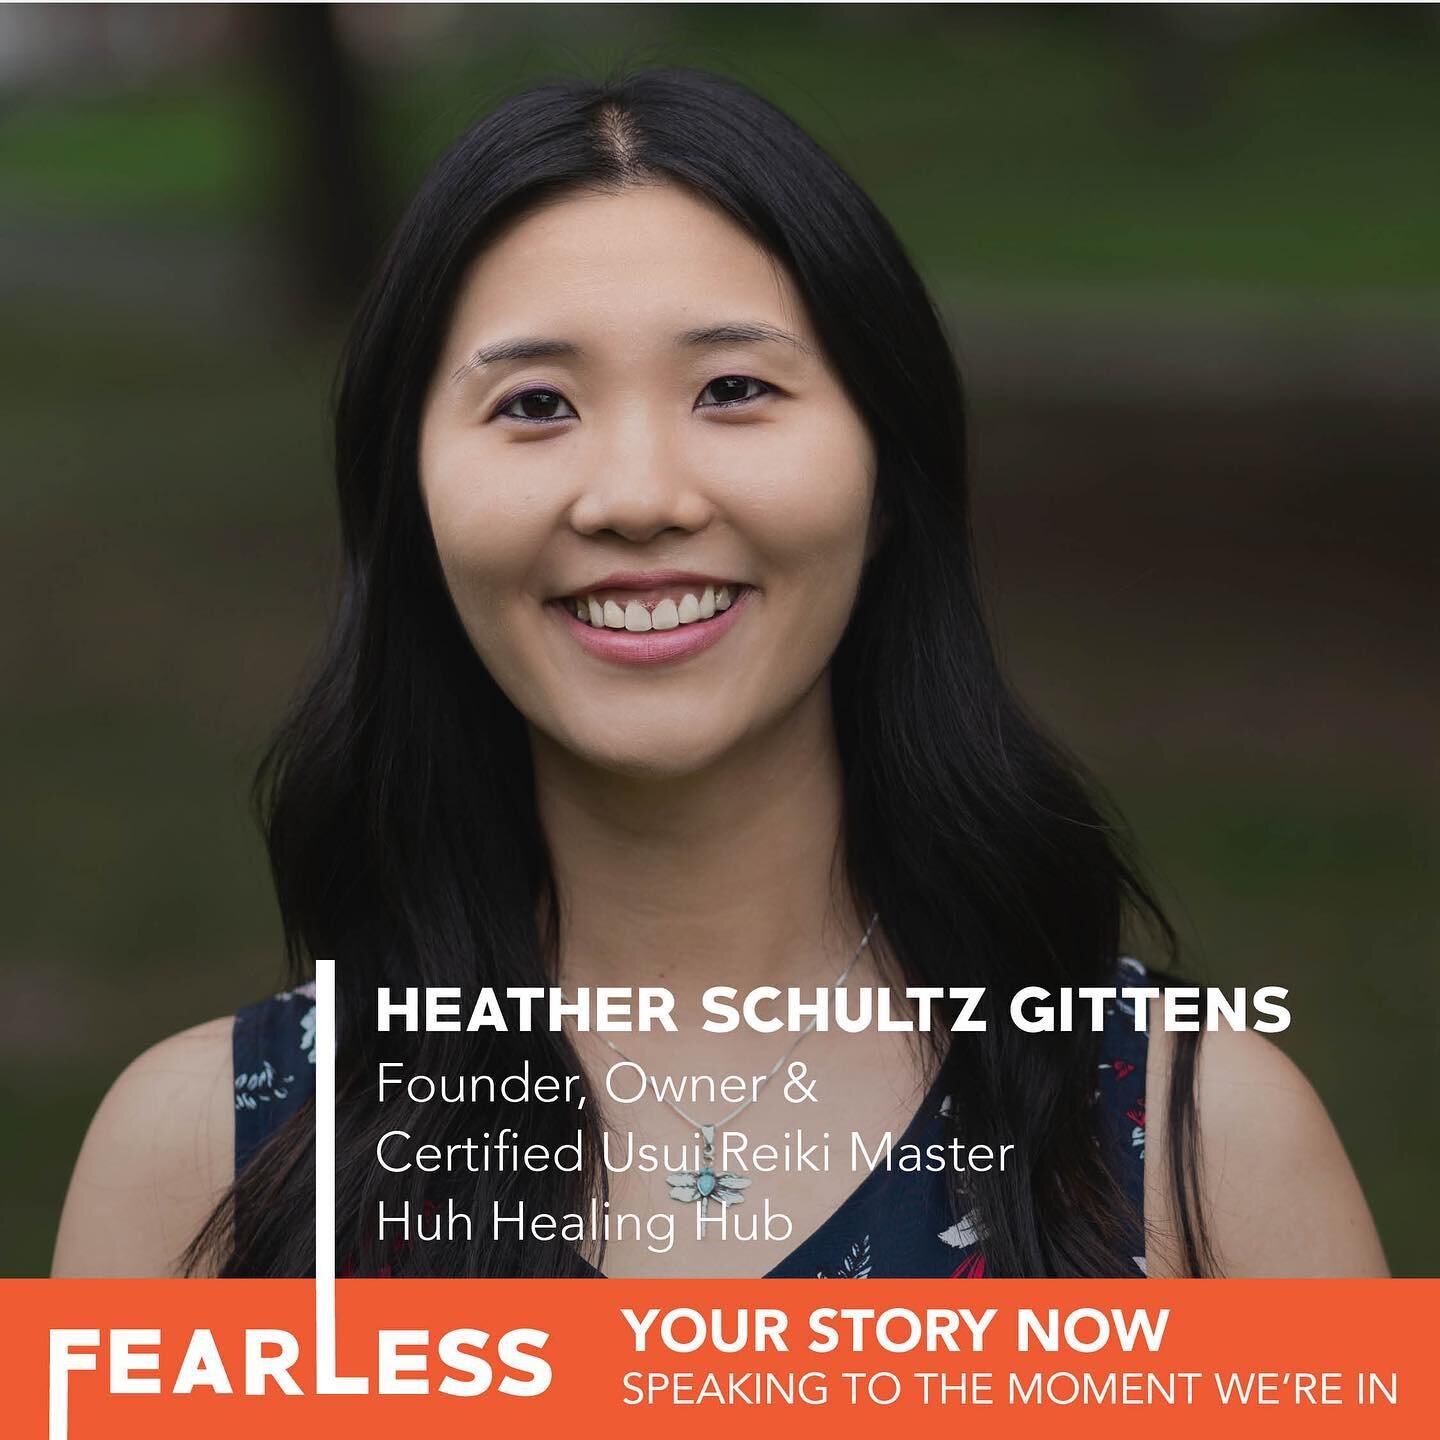 I&rsquo;m beyond proud to be sharing the spotlight tonight (Feb. 16th) at 5:30 p.m. EST in the latest cohort of Your Story Now &mdash; a transformational public speaking intensive 🗣🗣🗣 through Fearless Communicators (@stand4fearless) &mdash; with s